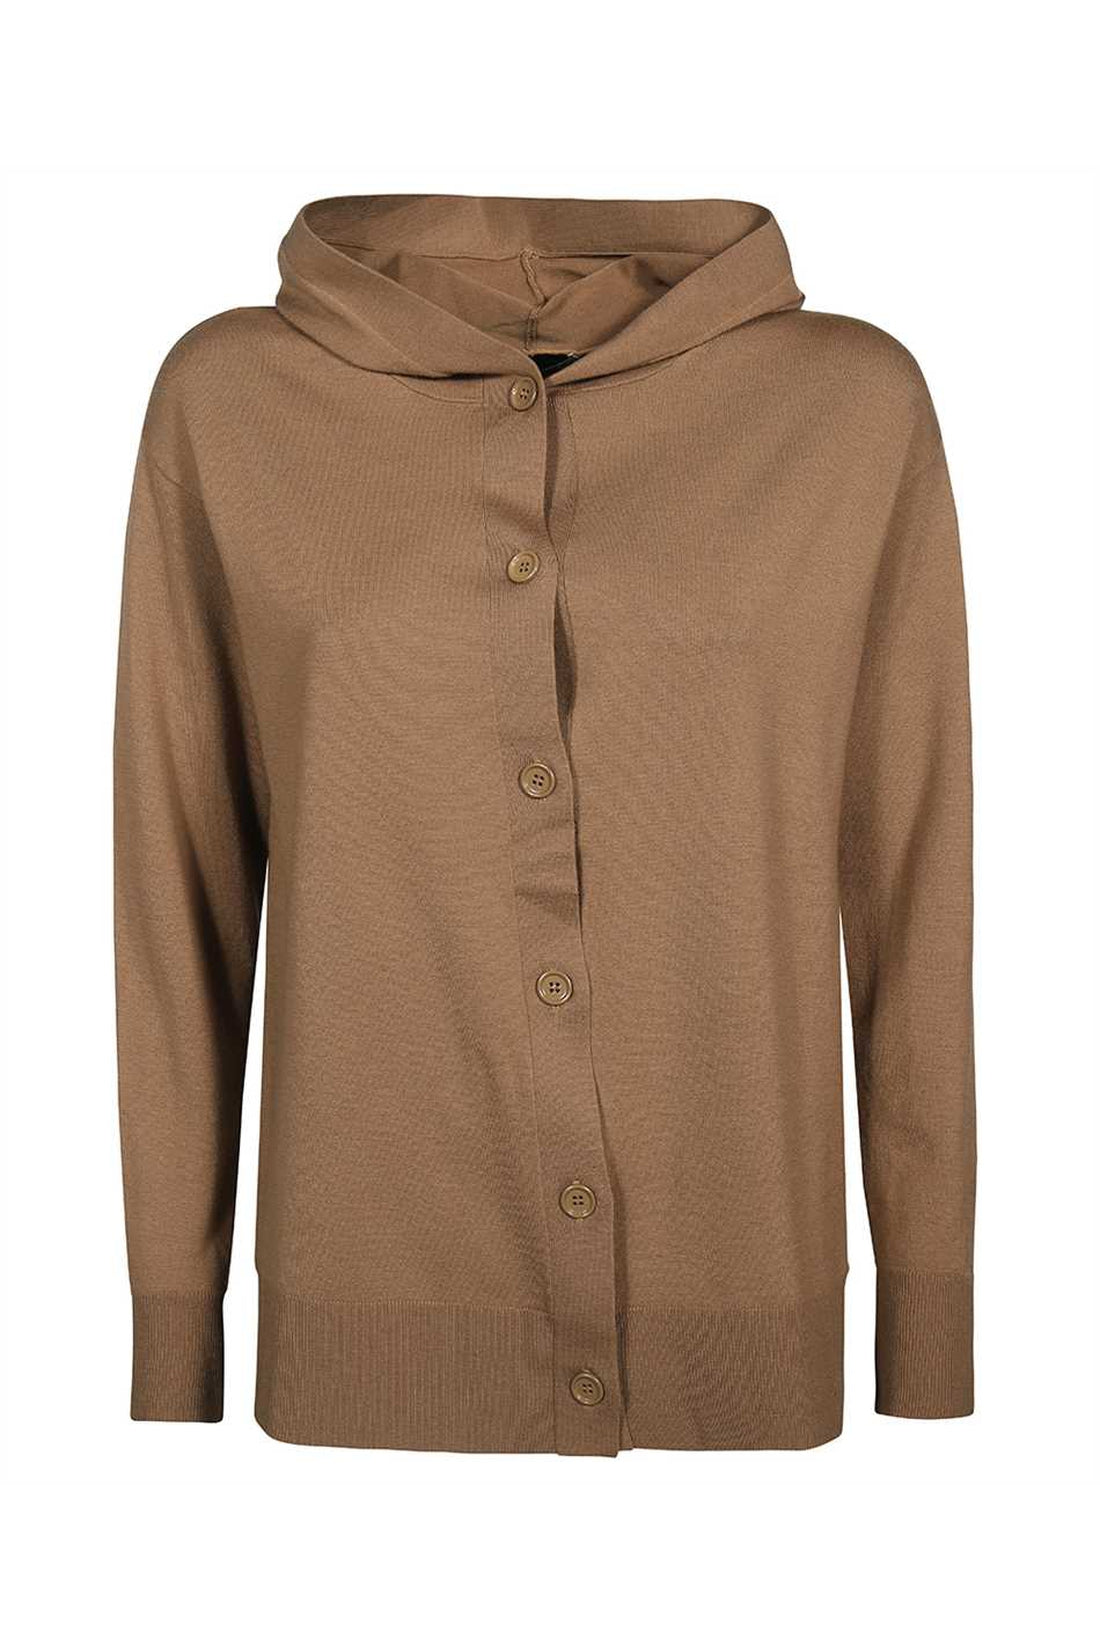 Max Mara-OUTLET-SALE-Rienza knitted hoodie-ARCHIVIST